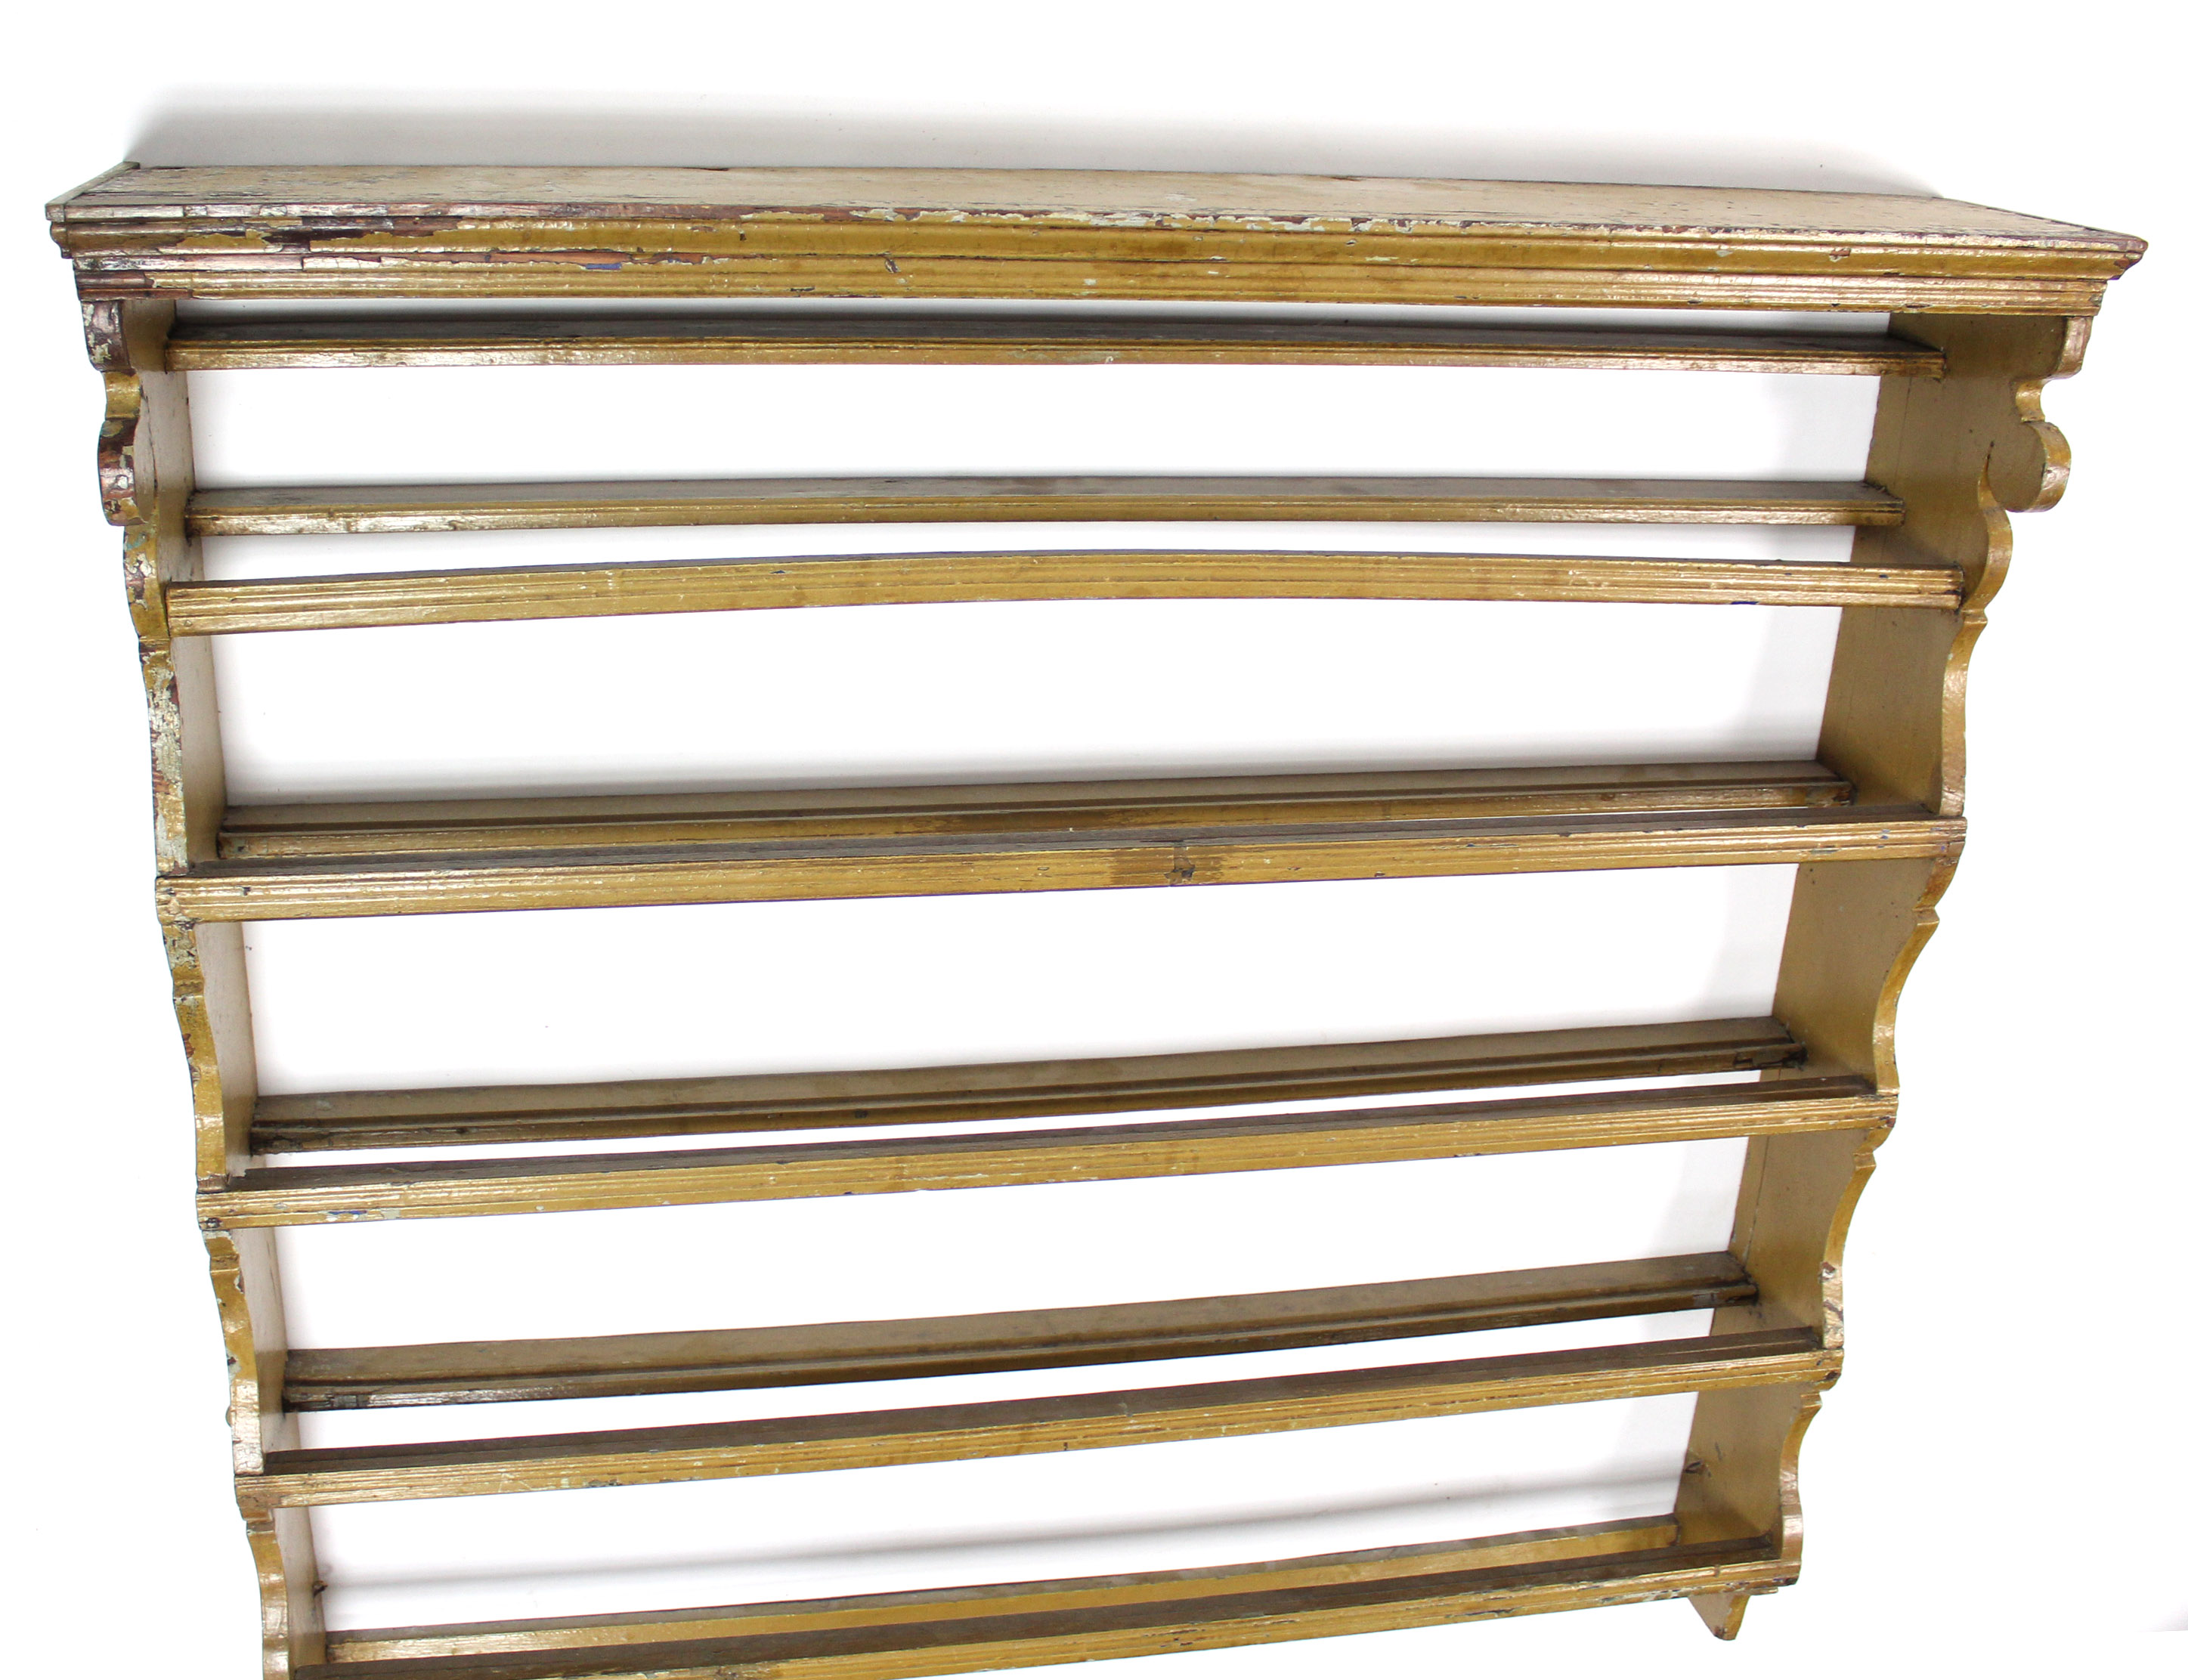 An early 18th century wall-mounted plate rack of three open shelves, painted in ochre, 40½” wide x - Image 3 of 3